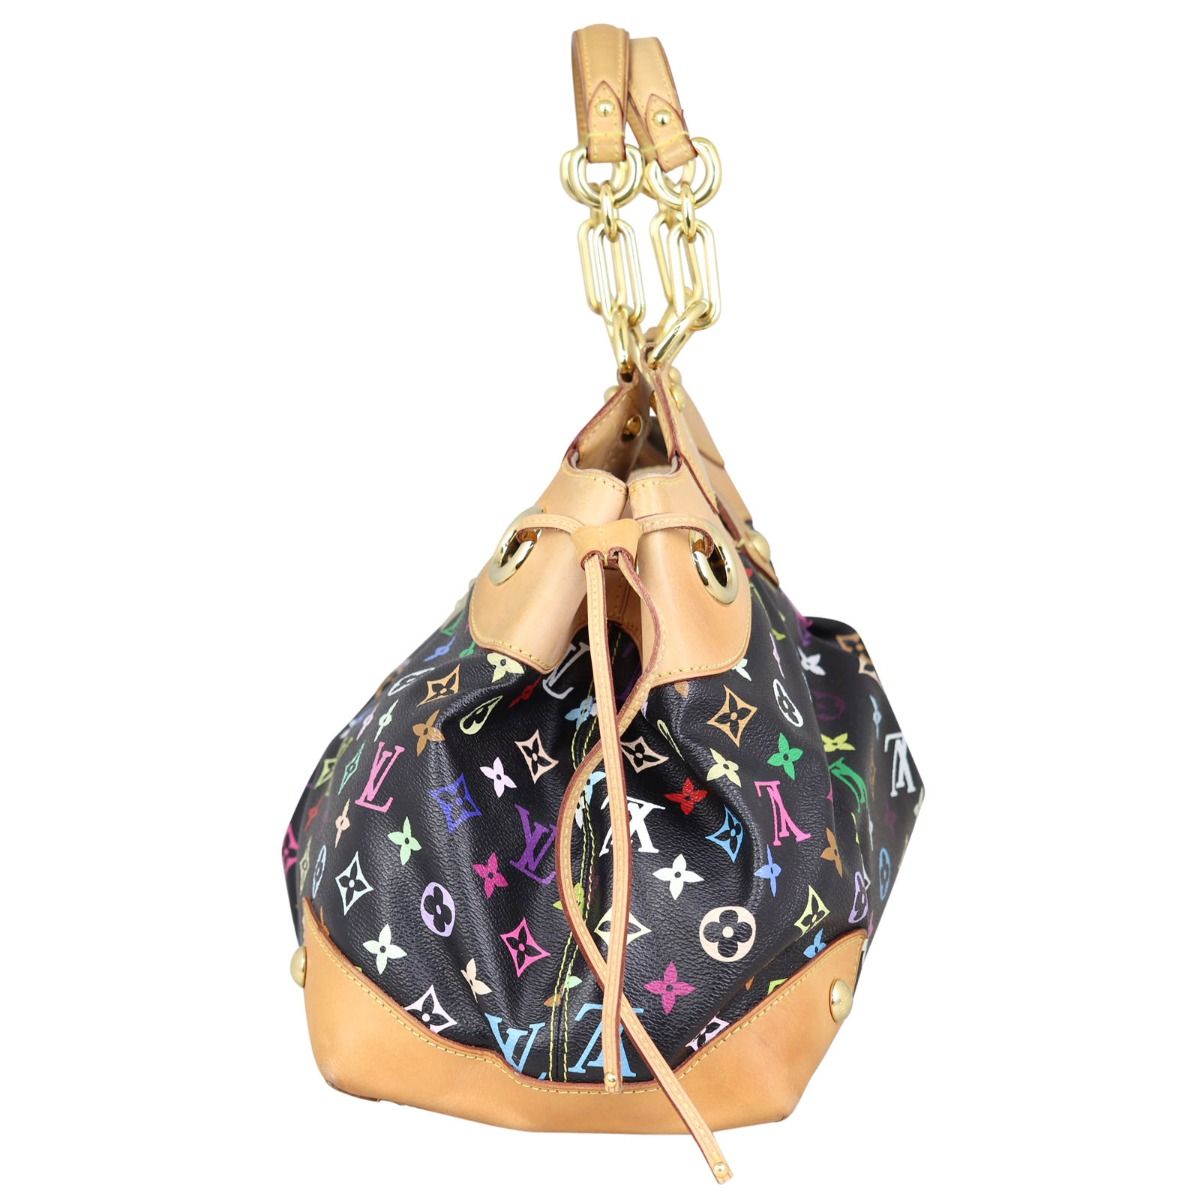 Named after the famous actress Ursula Undress, the Louis Vuitton